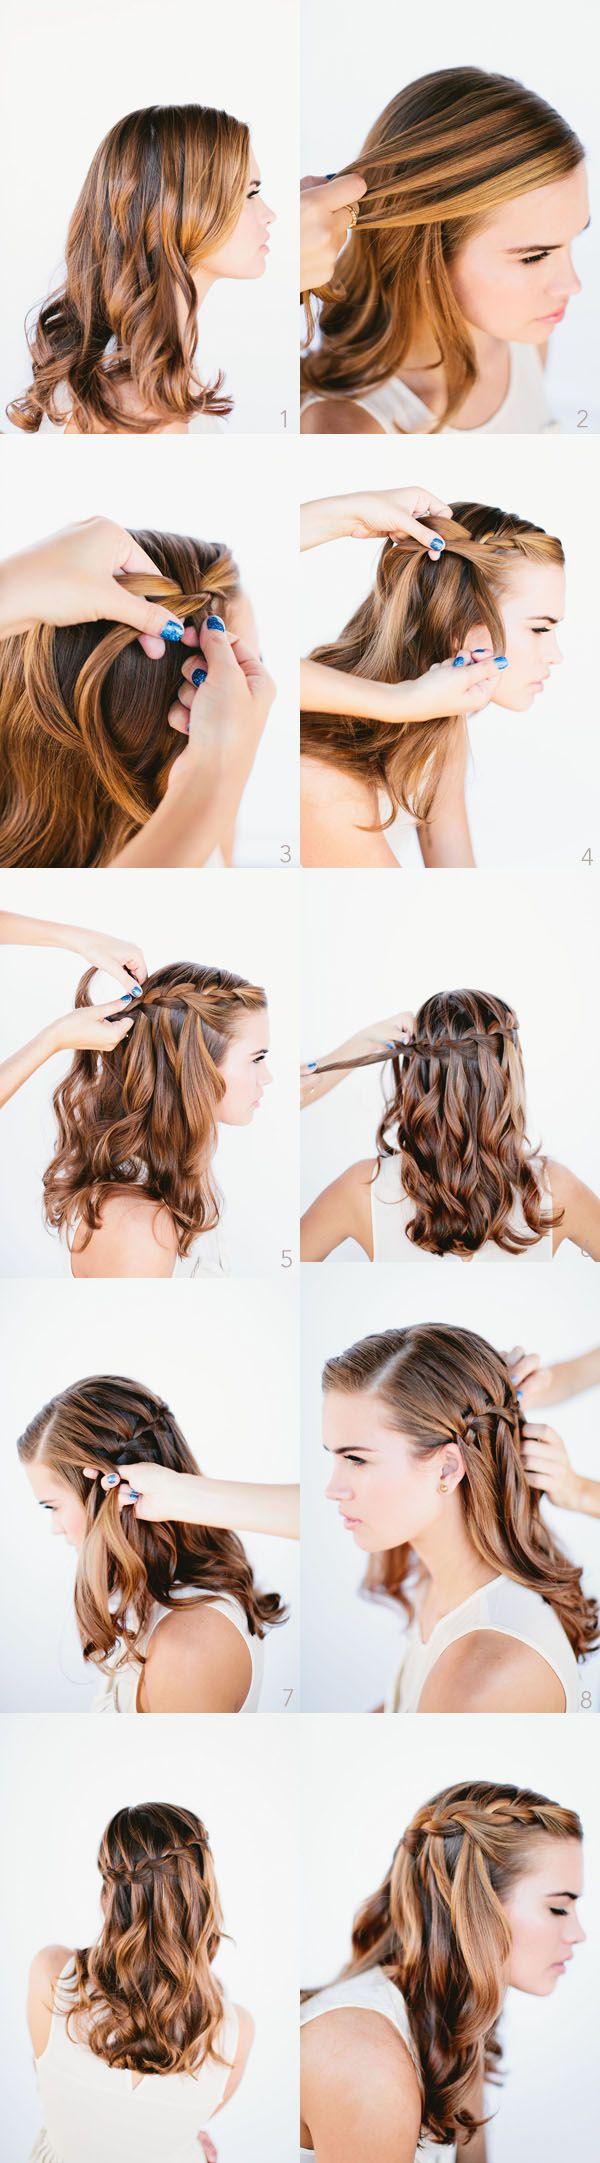 Mariage - 22 Ways To Make Your Hairstyle With Braids